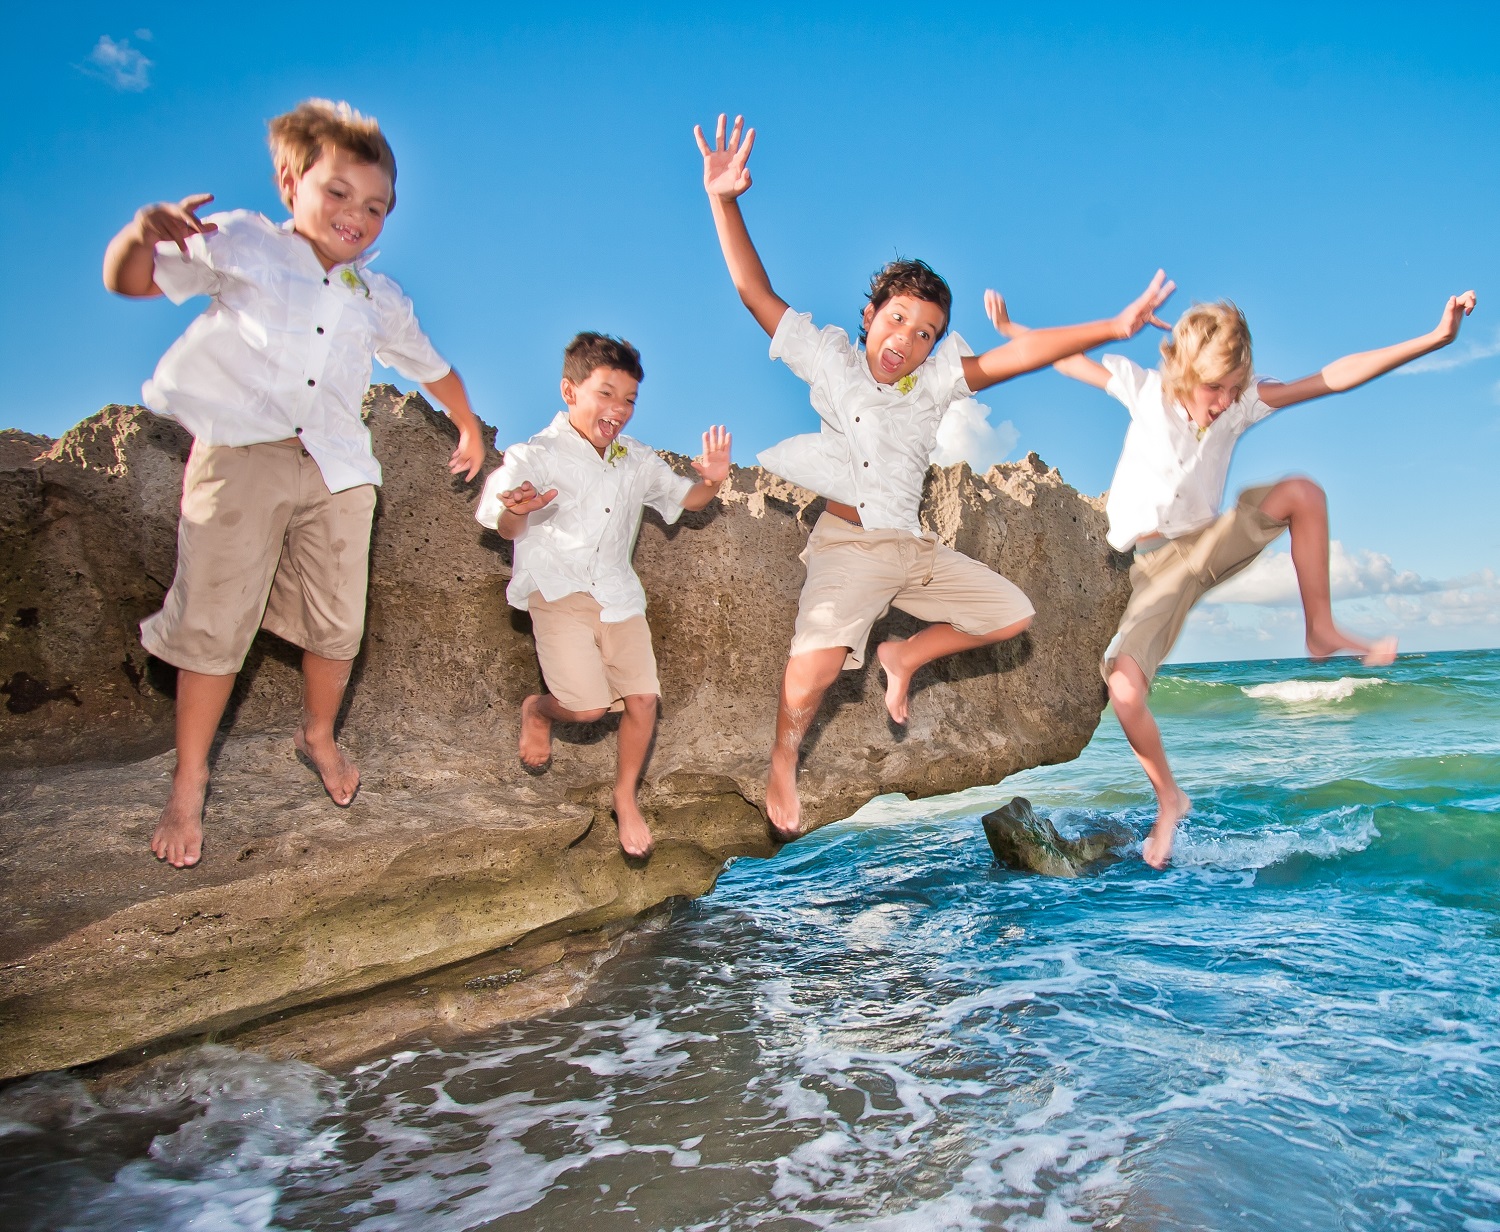 Tropaholic.com-Beach-Wedding-clothes-boys-jumping-off-rocks-into-the-water